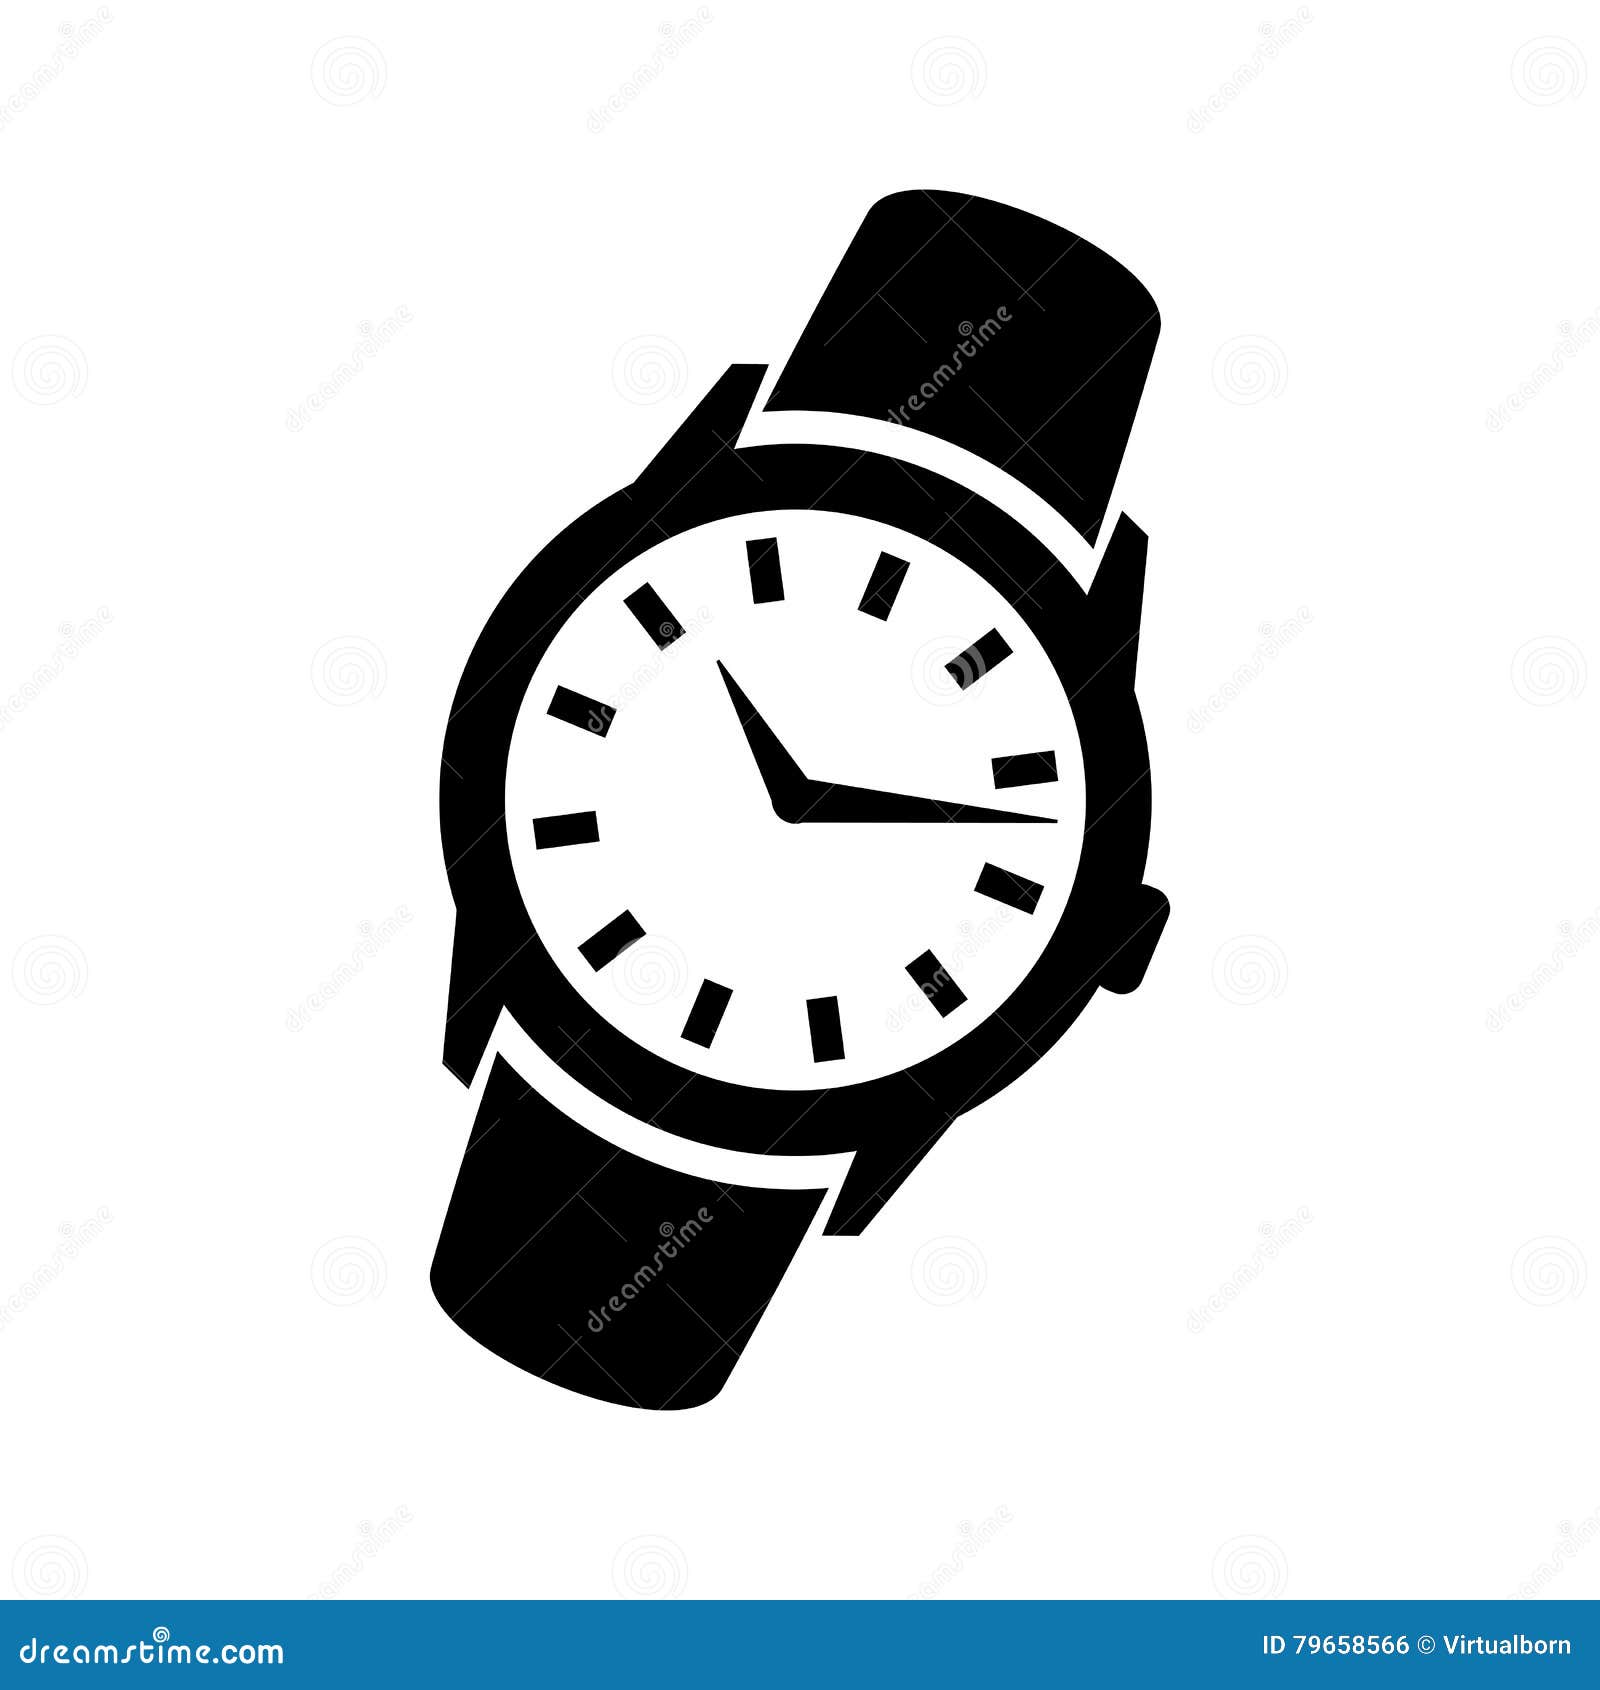 watch clipart black and white - photo #33